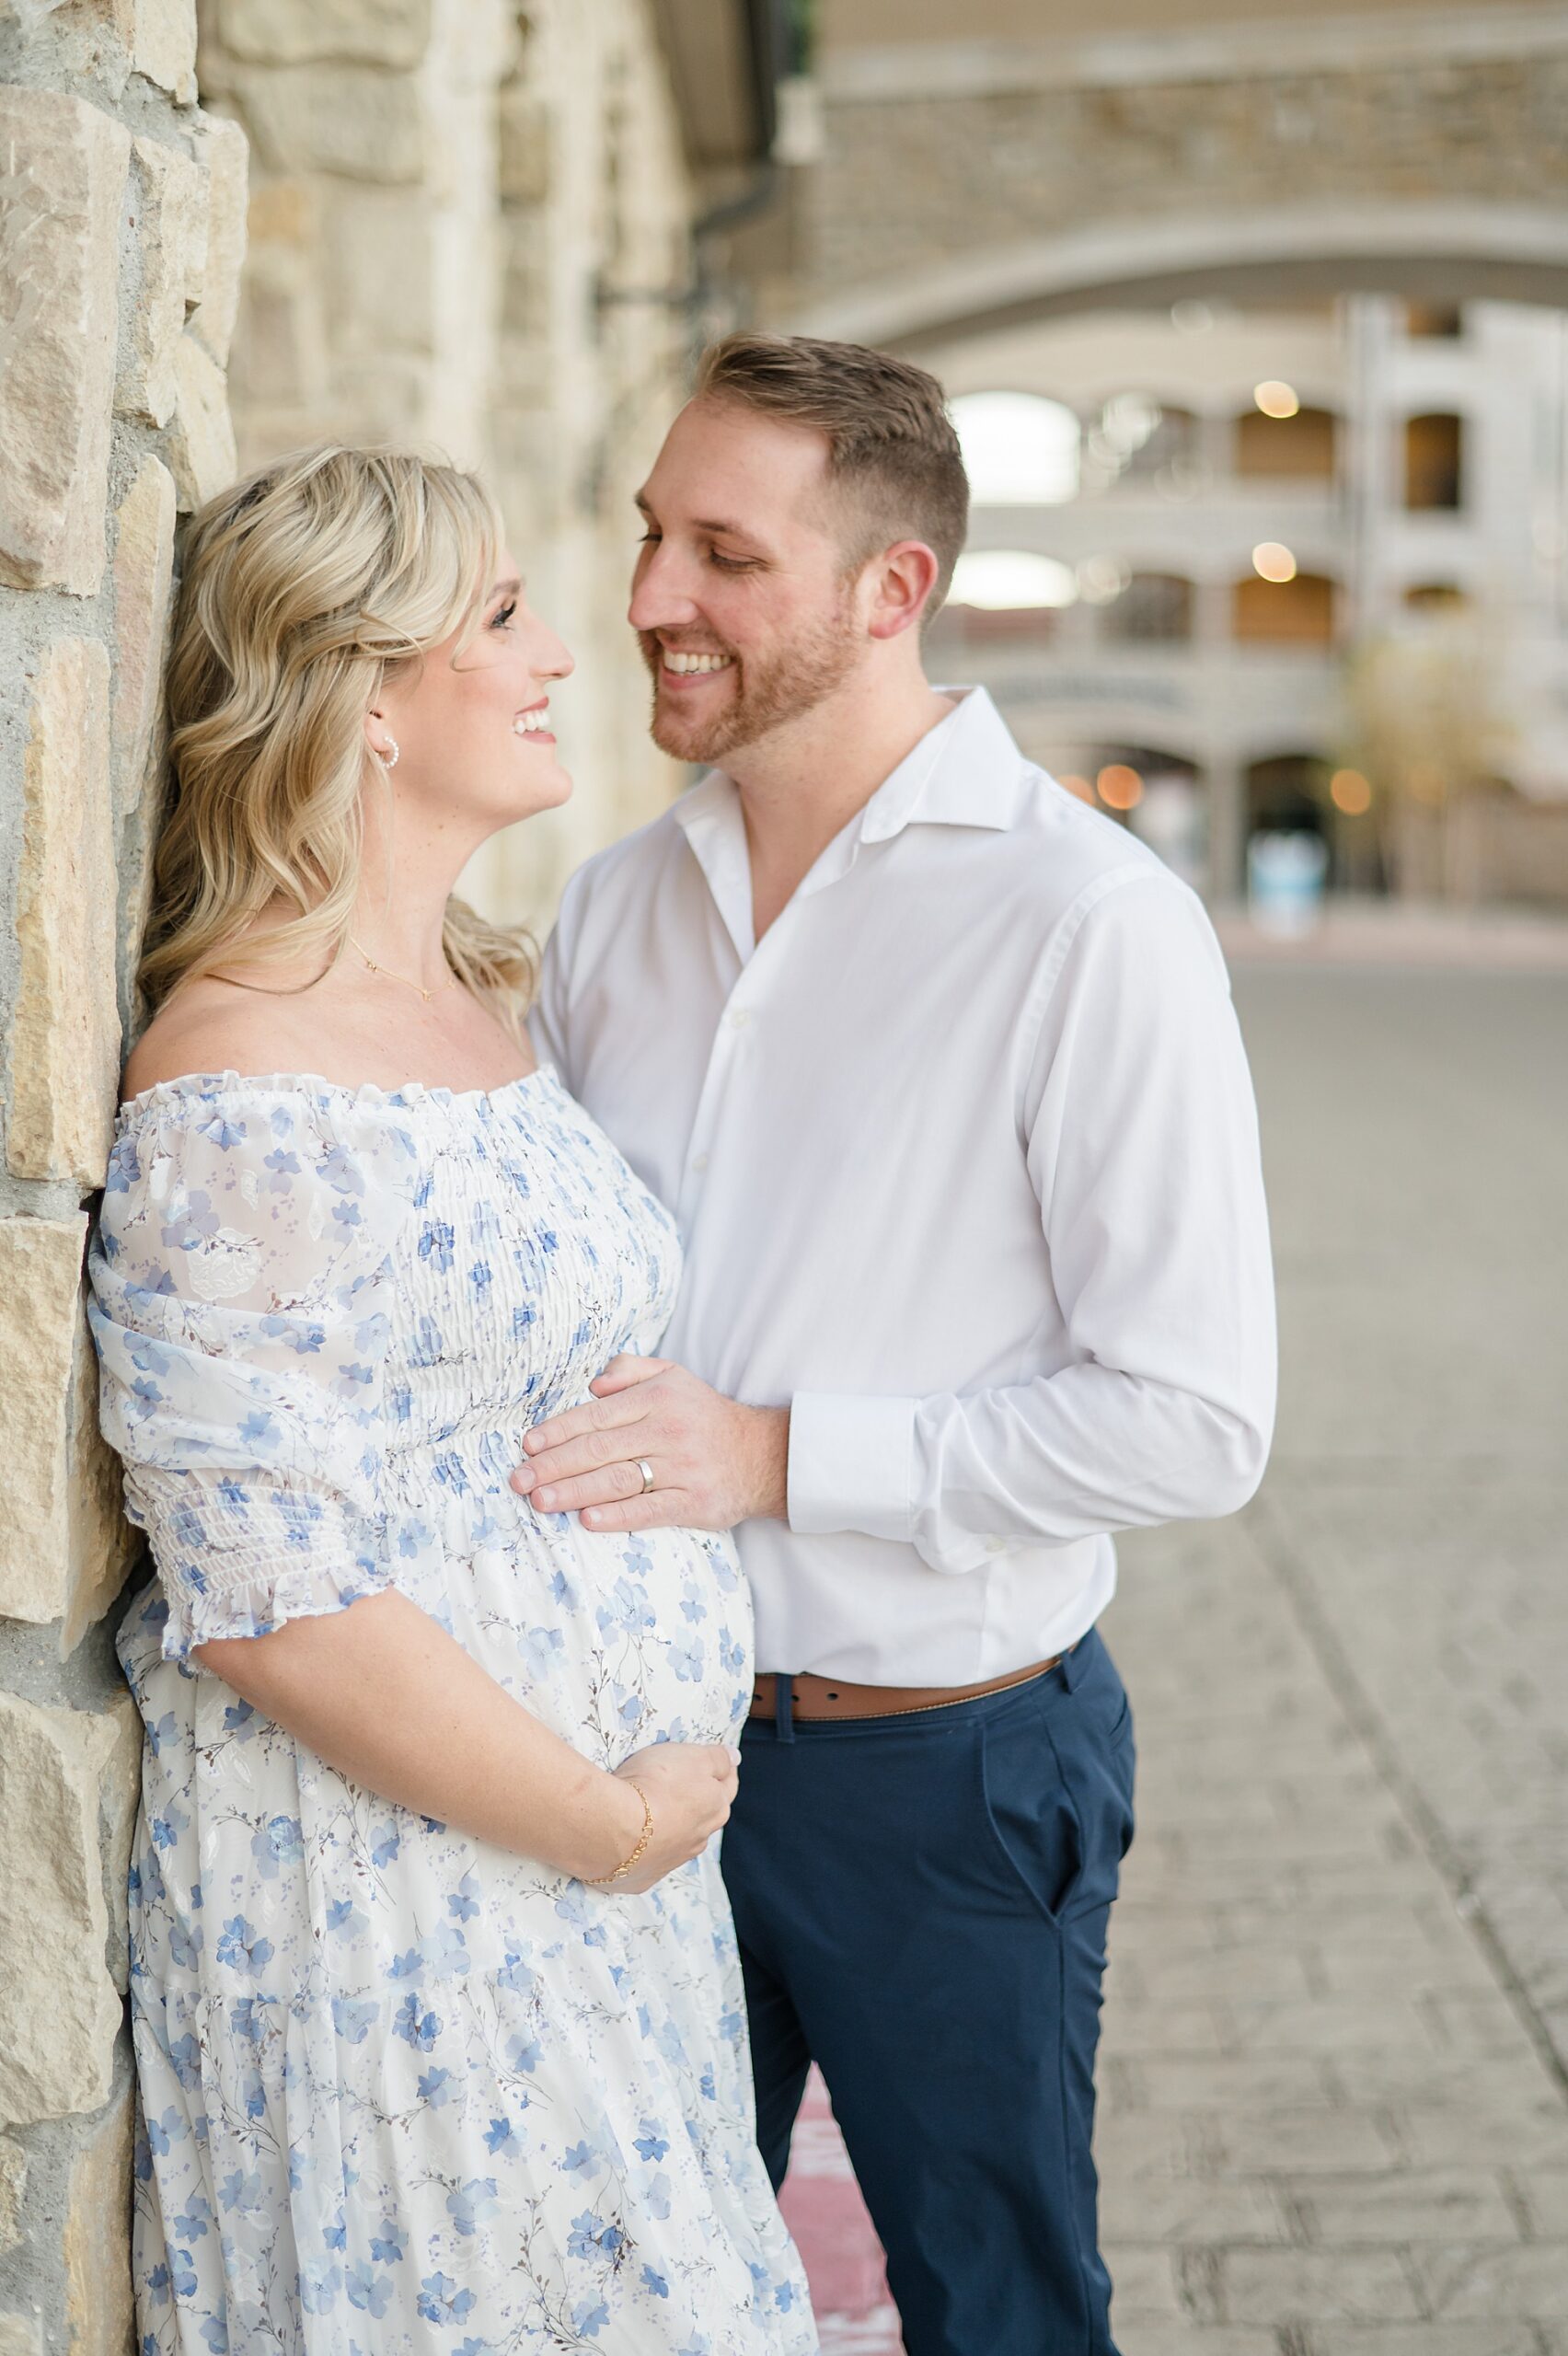 5 Reasons to Book Maternity Photos photographed by Lindsey Dutton Photography, a Dallas Family photographer
